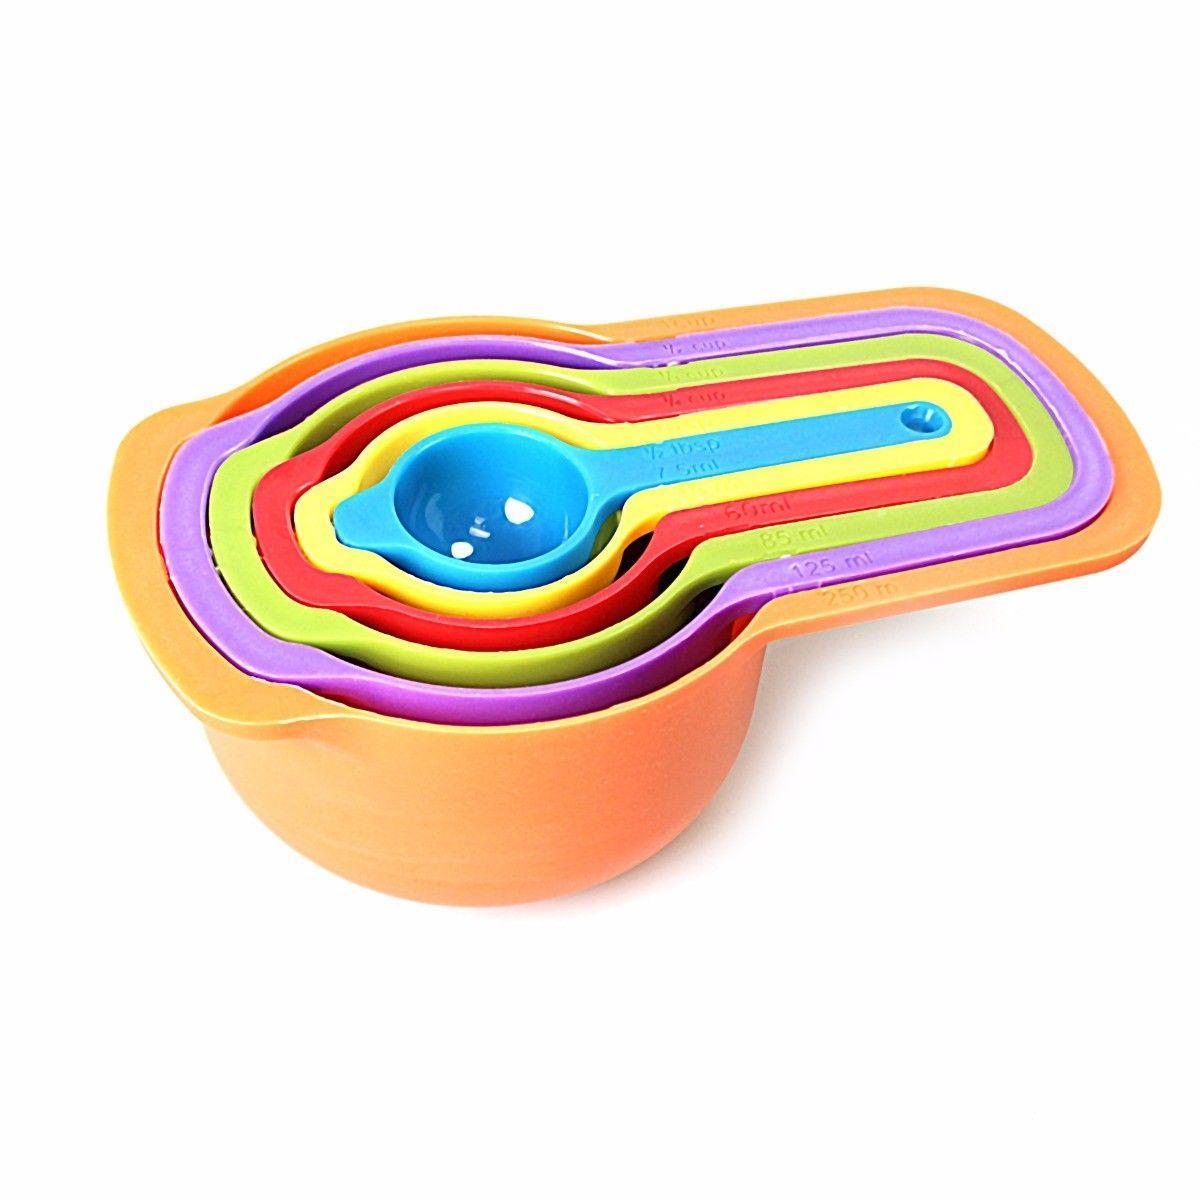 Assorted Colour Plastic Measuring Cups For Multi Purpose Use 3614 (Parcel Rate)